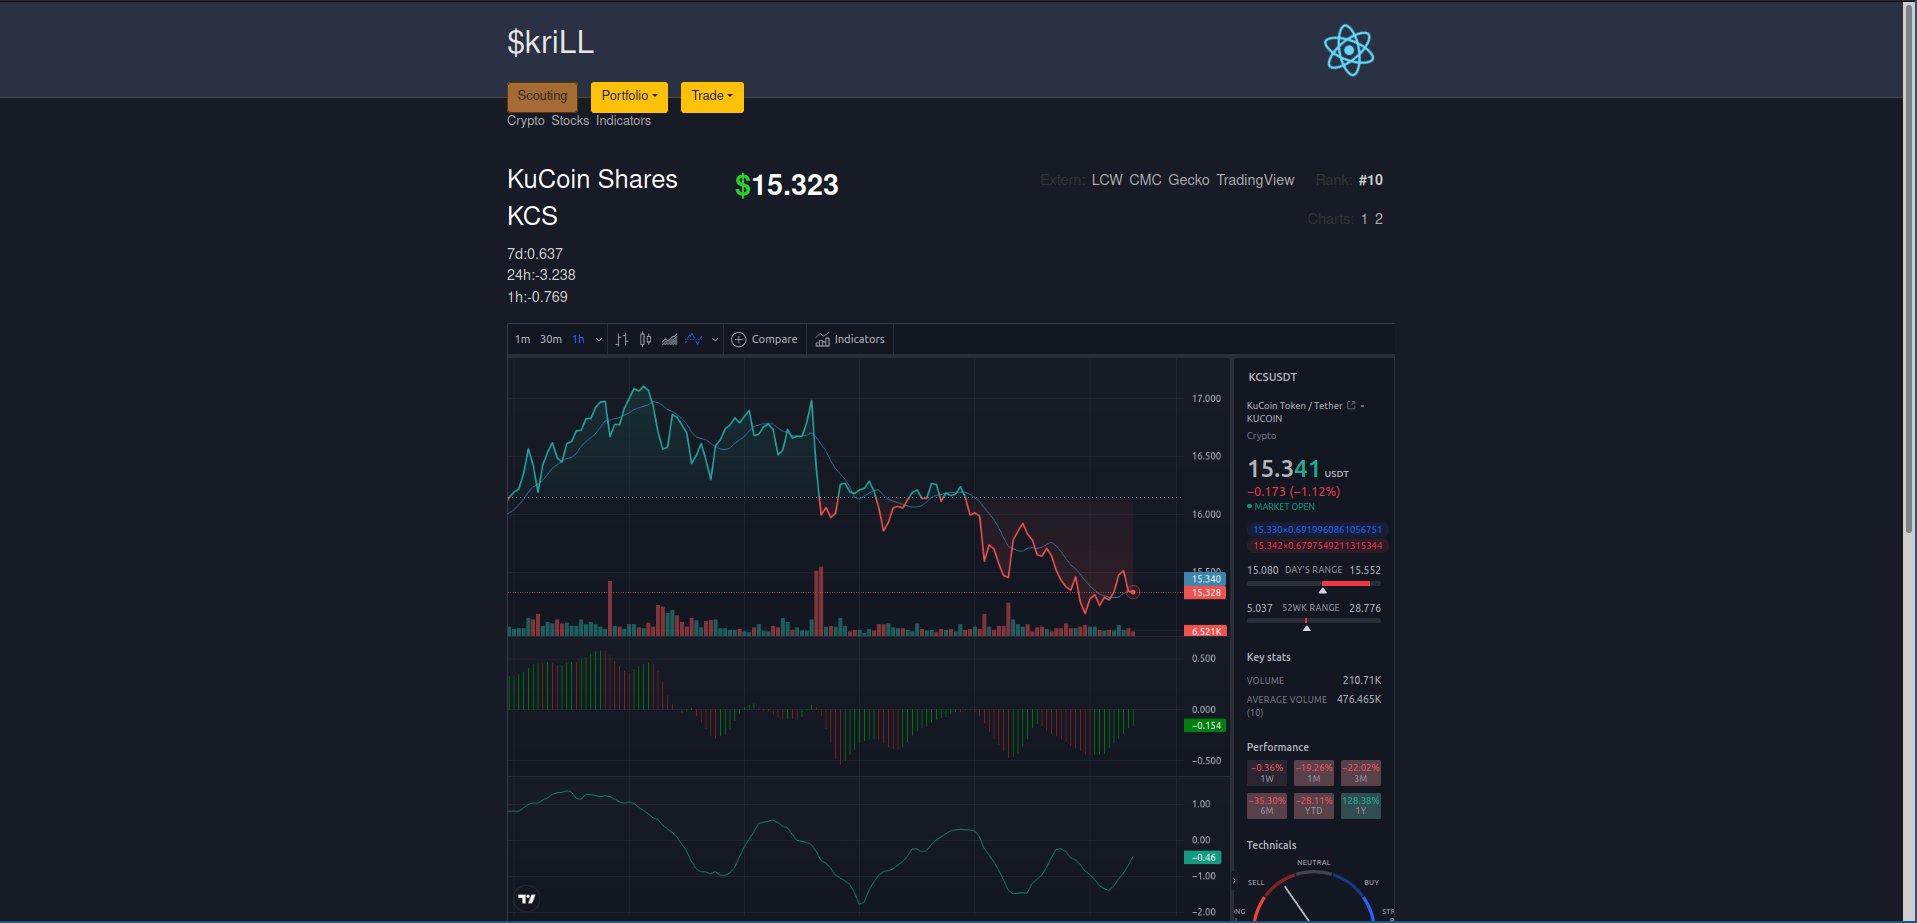 Site screenshot showing crypto detail page with charts